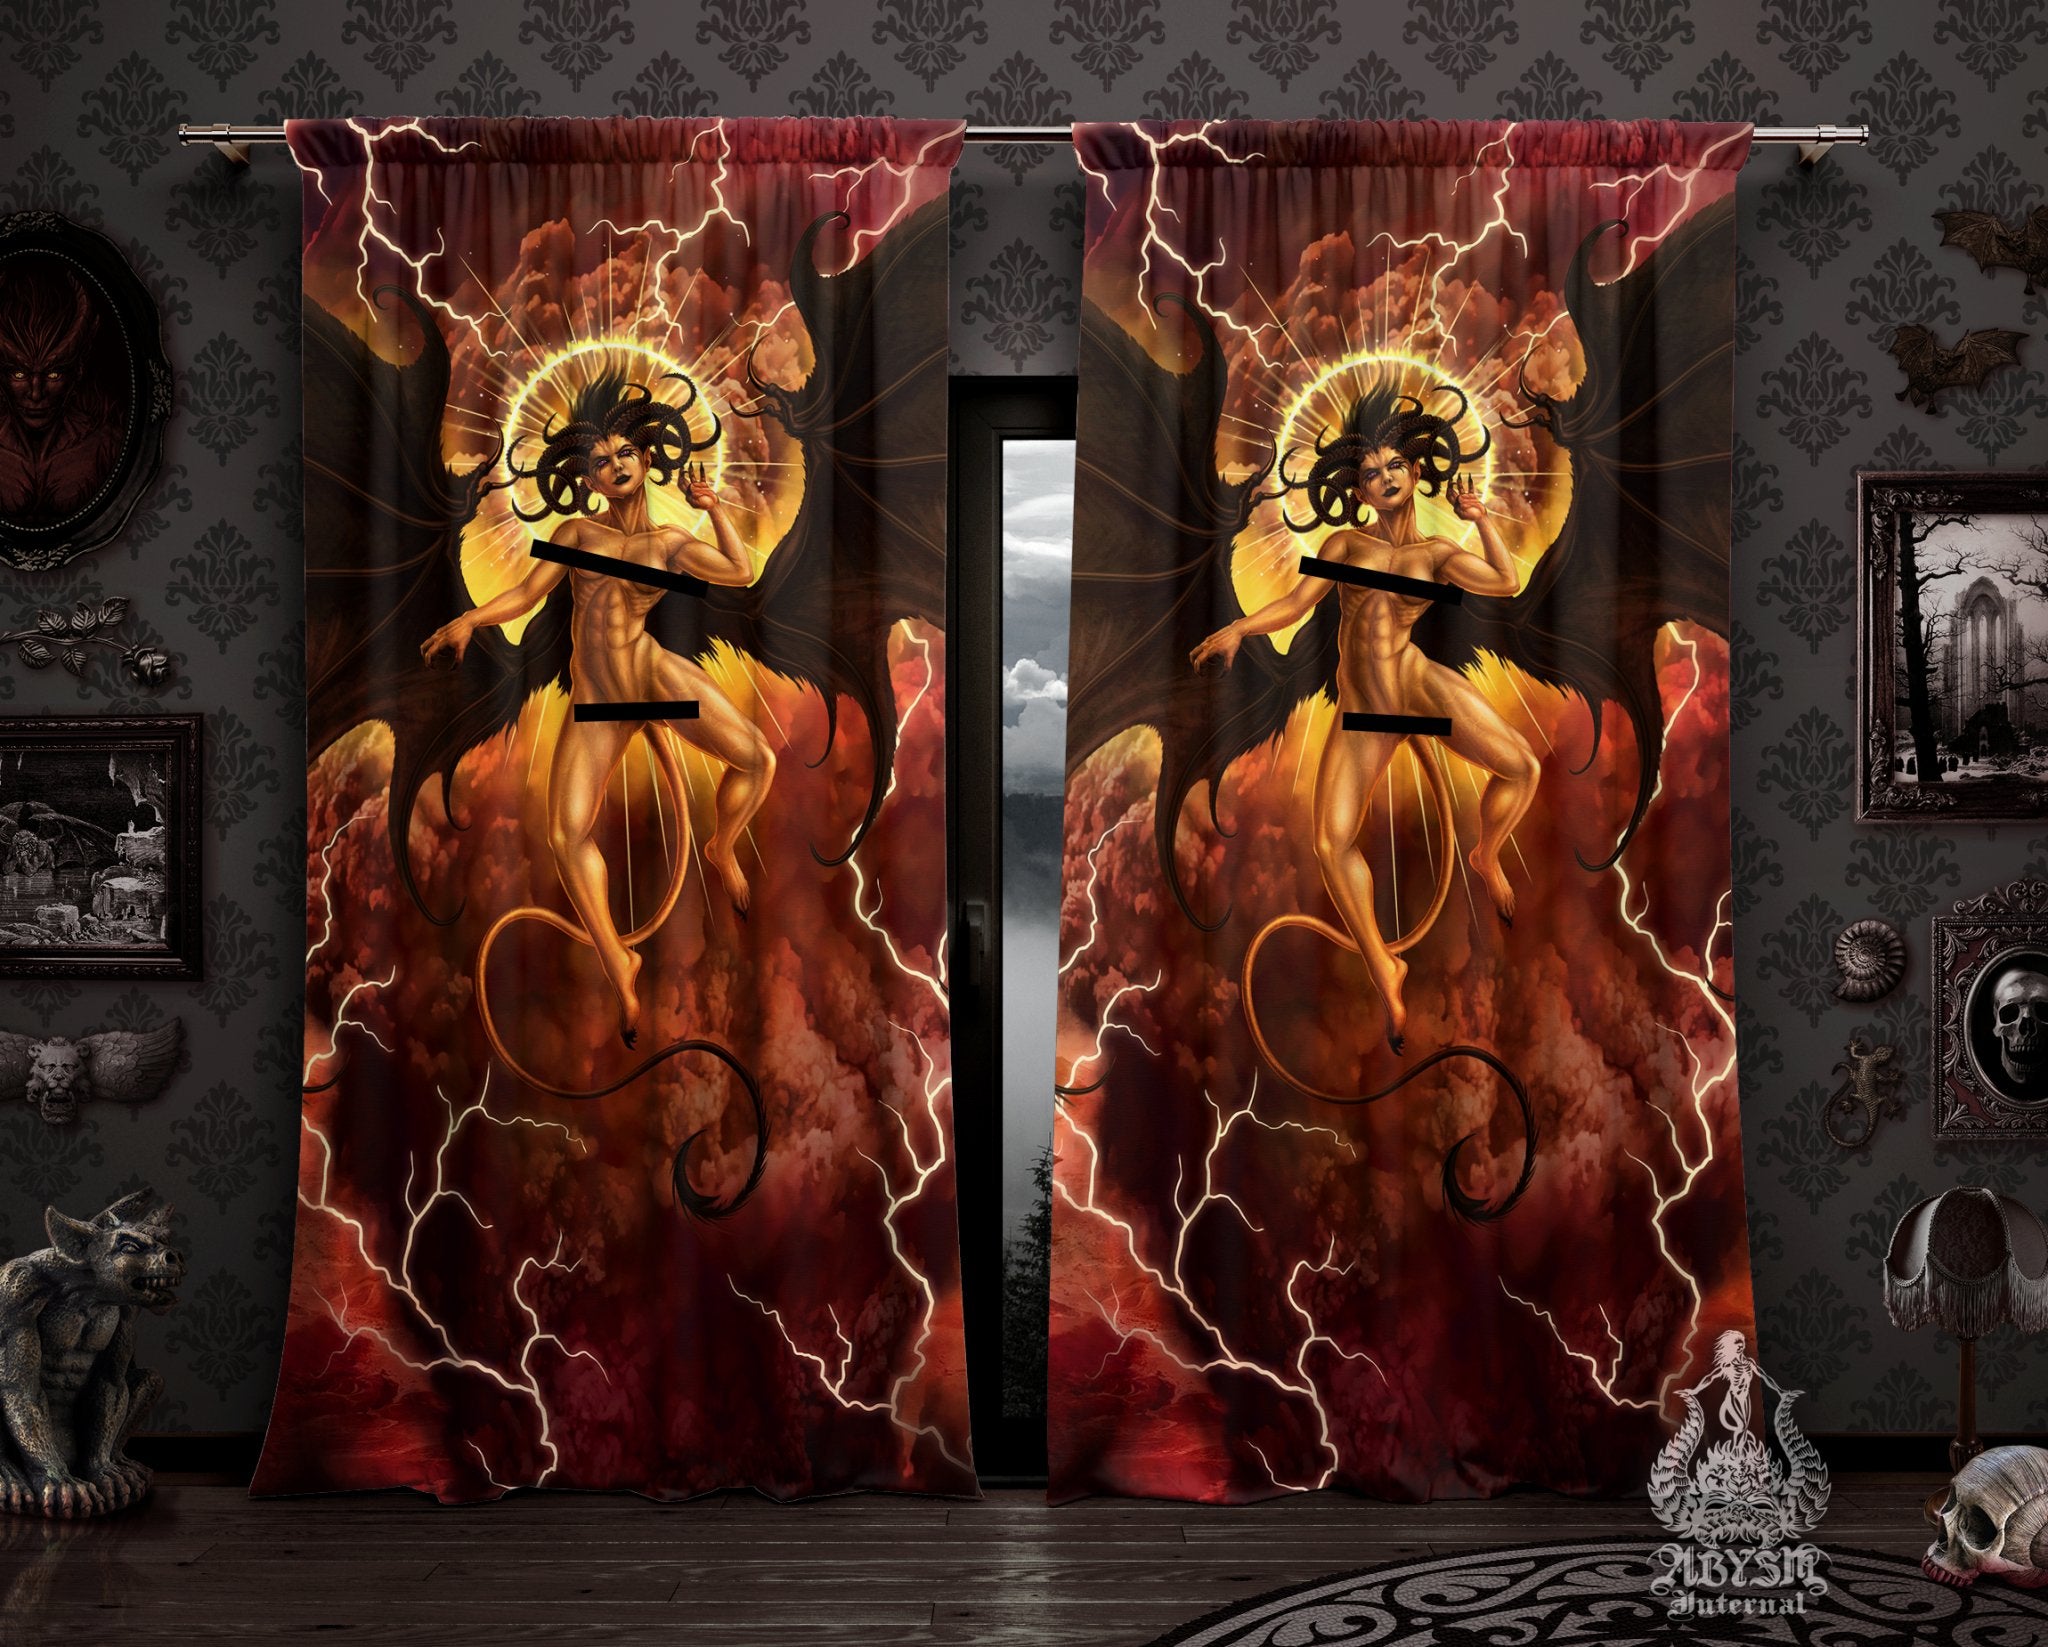 Lilith Curtains, 50x84' Printed Window Panels, NSFW Demoness, Dark Erotic Art Print, Satanic Decor - Nude, Semi or Clothed, 3 versions - Abysm Internal